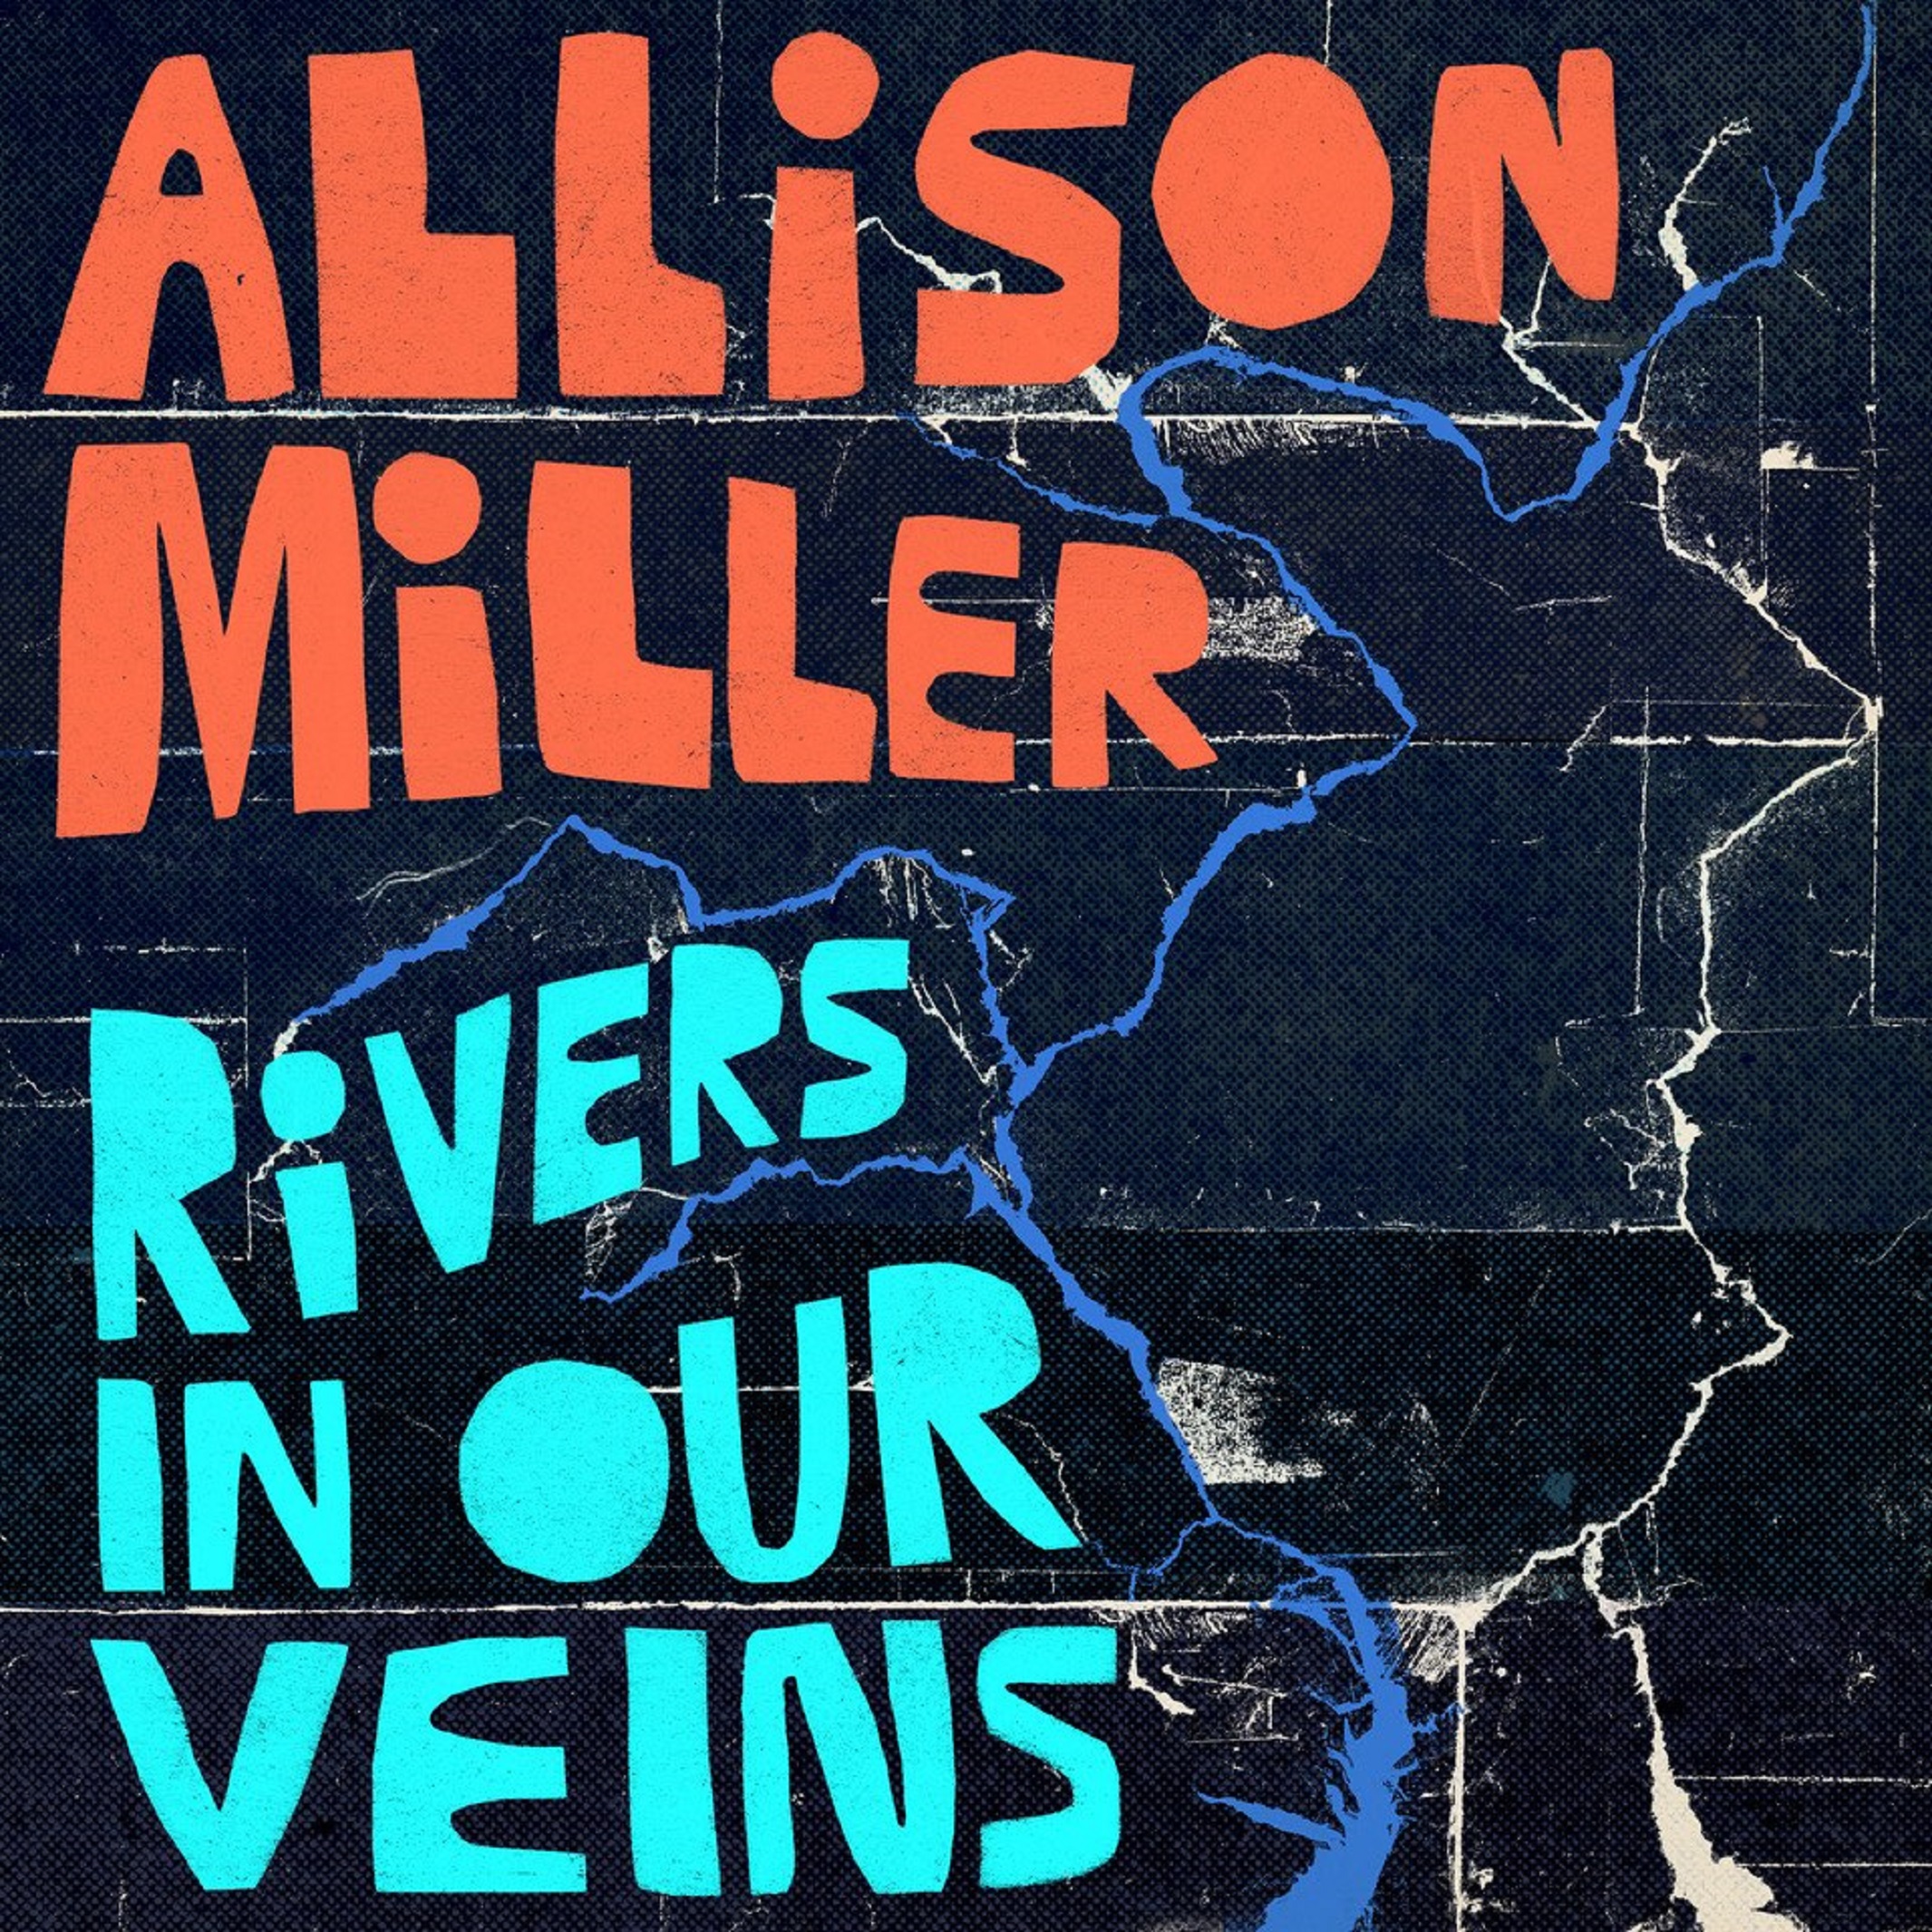 Acclaimed Drummer Allison Miller Releases New Album Celebrating Our Nation's Waterways "Rivers In Our Veins"